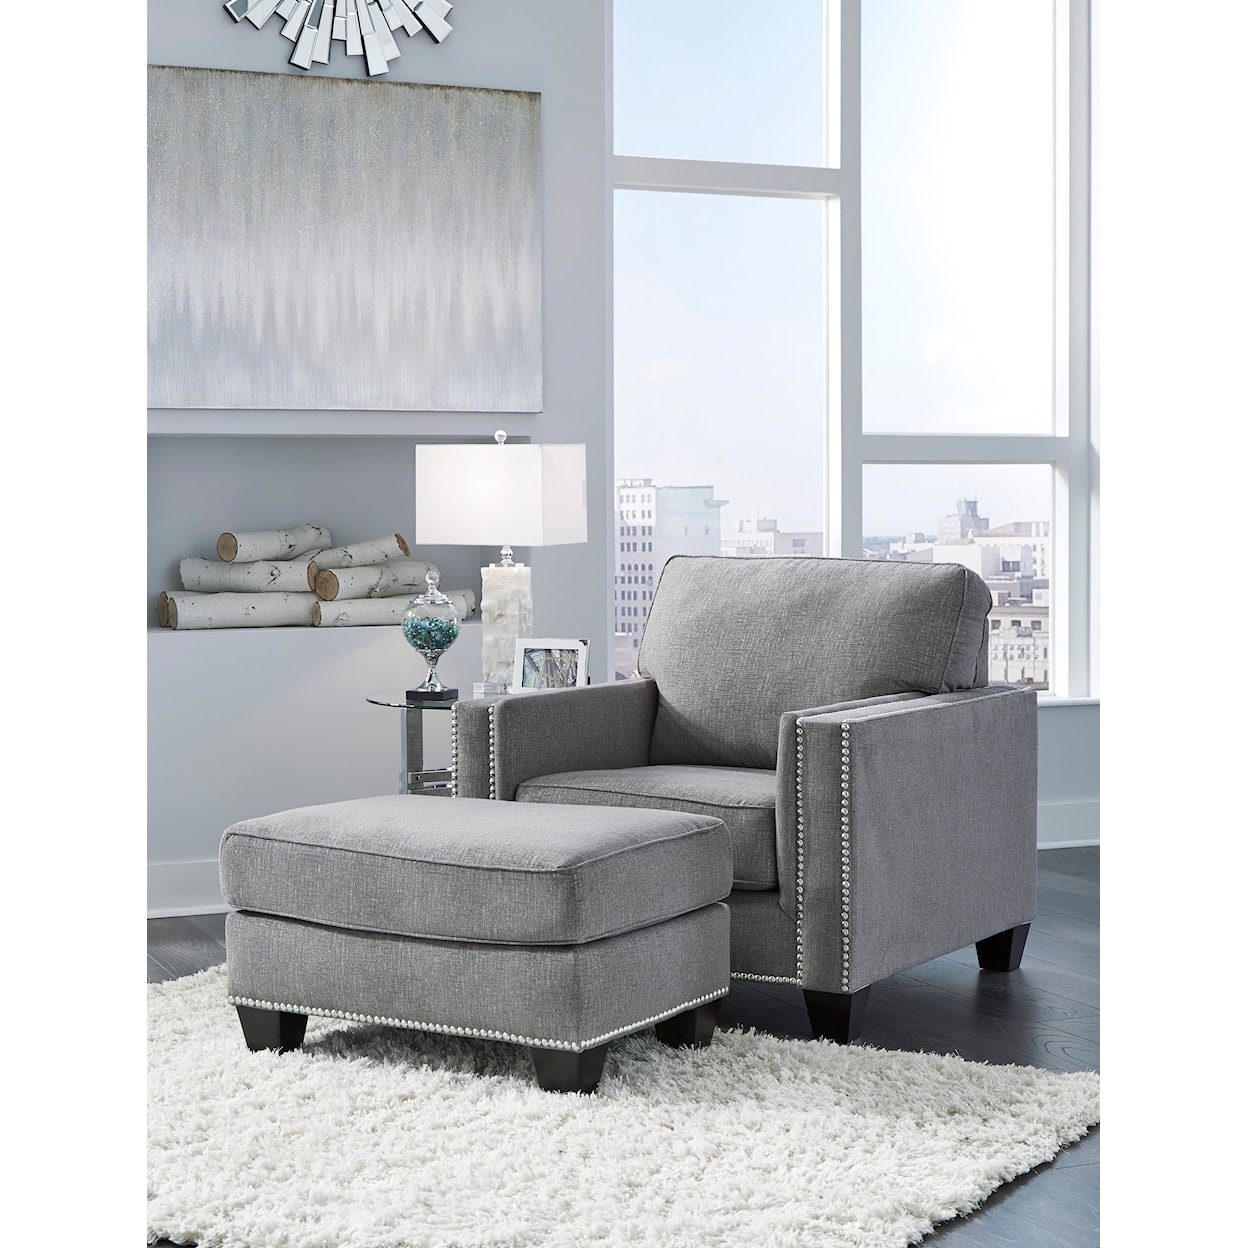 Signature Design by Ashley Barrali Chair and Ottoman